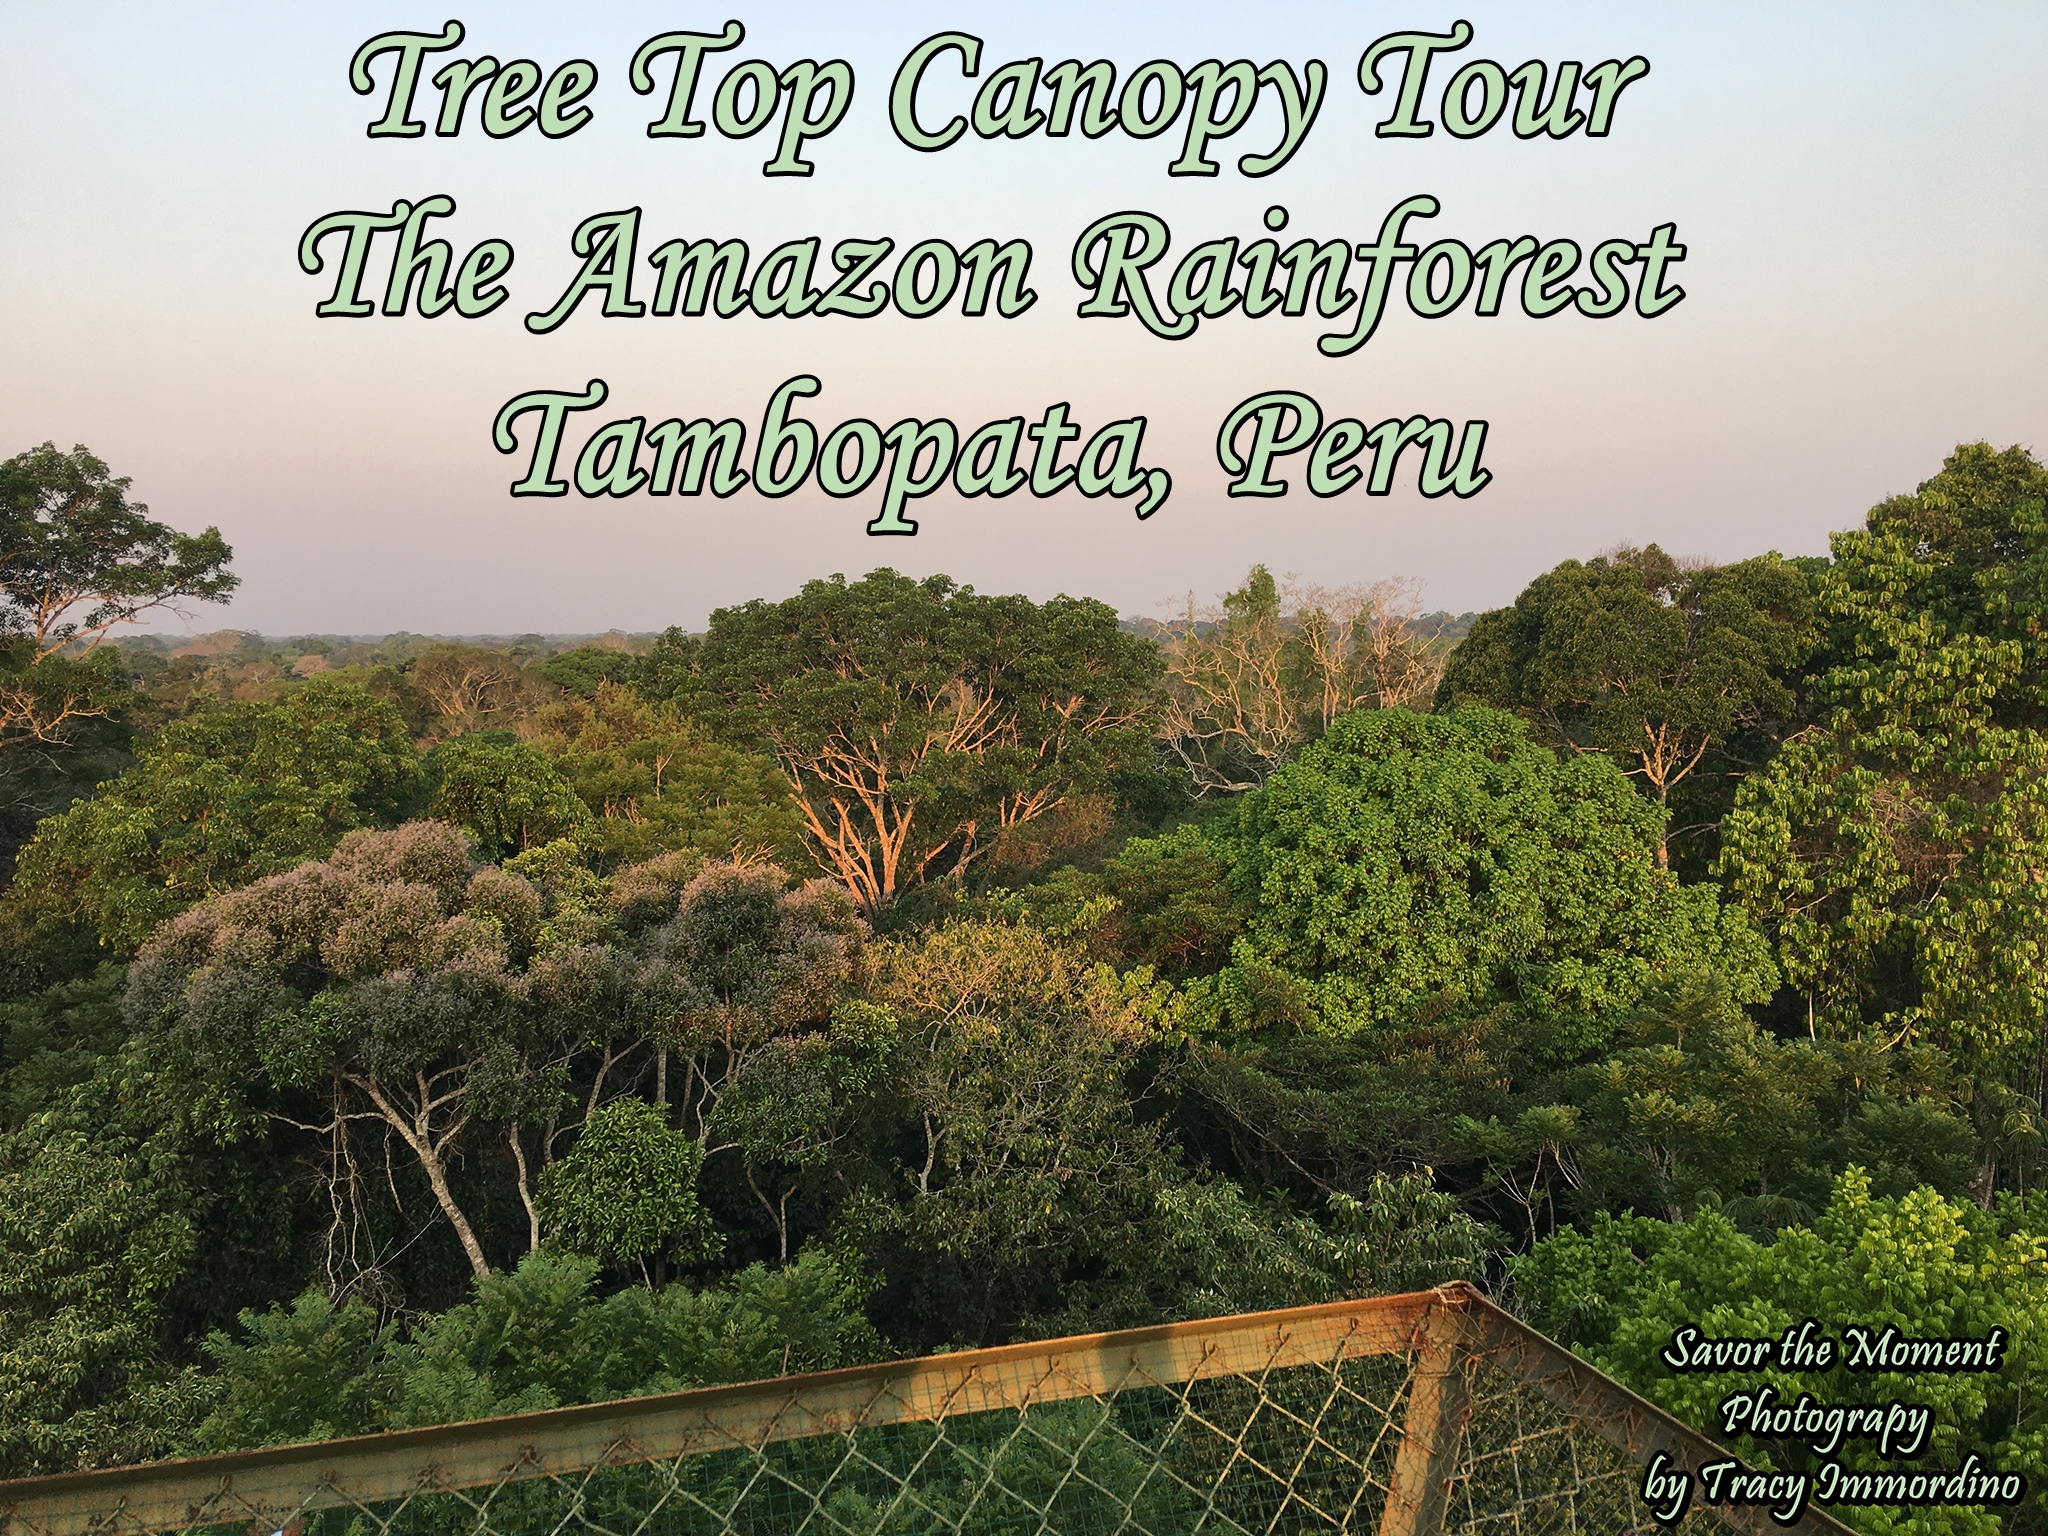 The Canopy Tower in Tambopata National Reserve, Peru